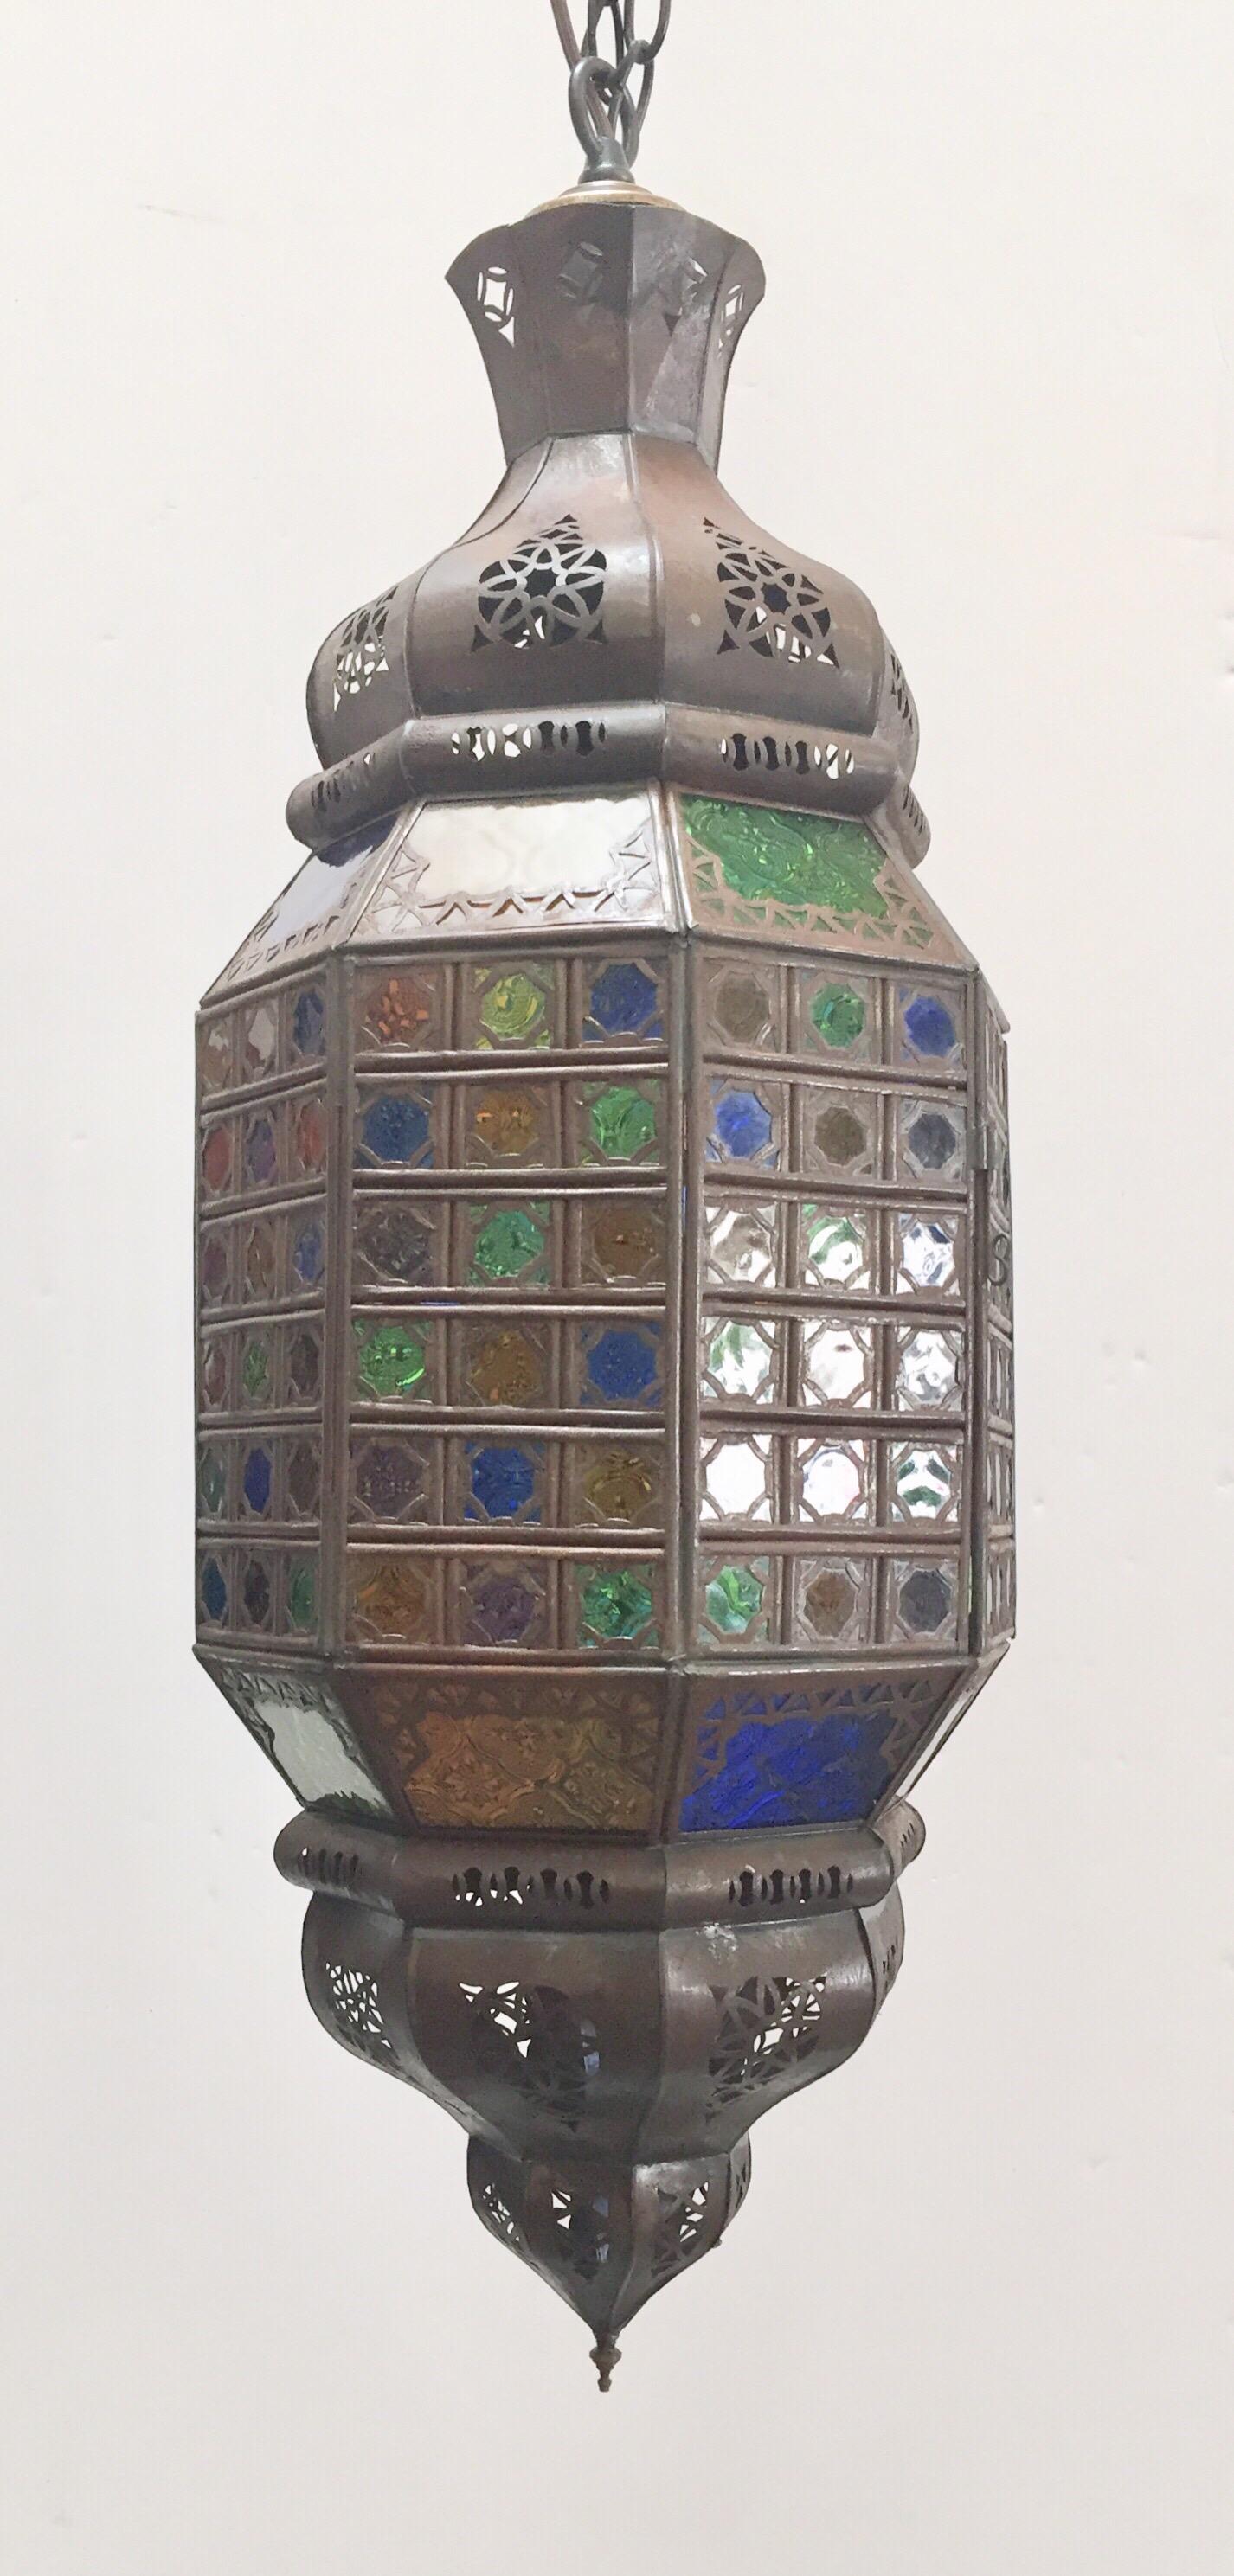 Stylish handcrafted Moroccan pendant with multi-color molded Moorish glass and metal with an antique bronze finish.
Moorish style with dozens of small cut-glass with Moorish openwork filigree metal design in diamond shape.
Rewired for one light